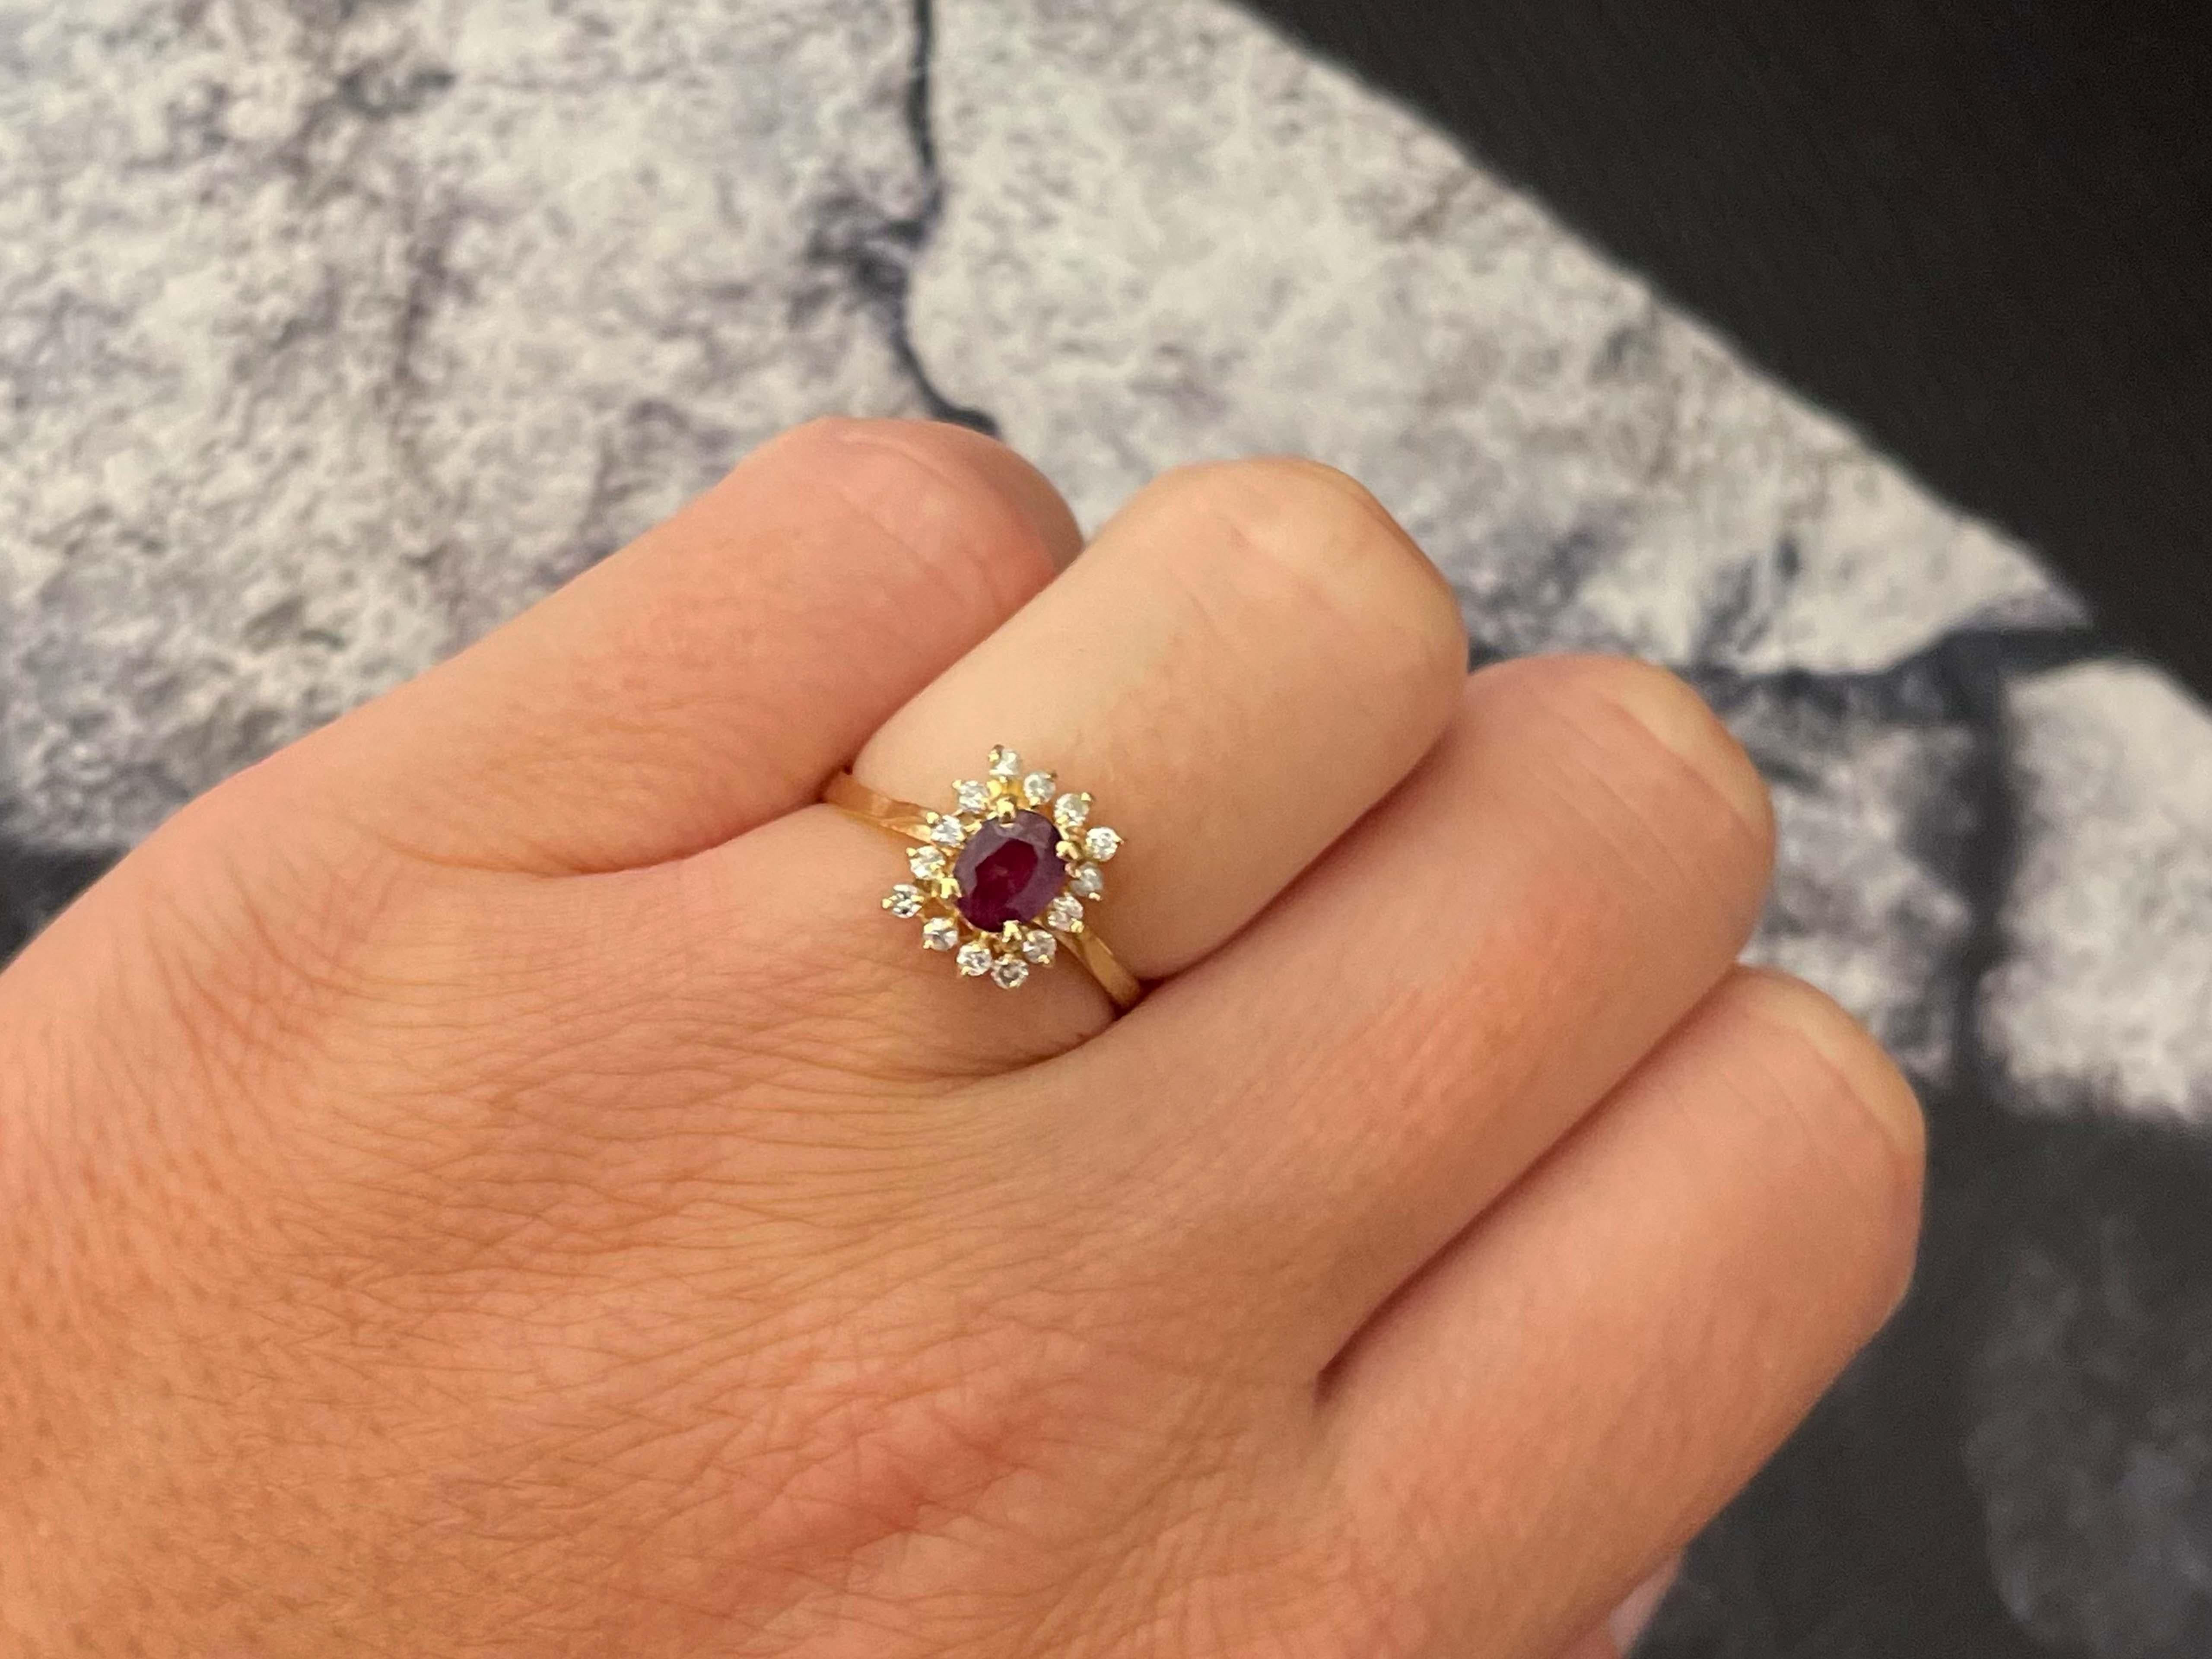 Item Specifications:

Metal: 14K Yellow Gold

Style: Statement Ring

Ring Size: 6 (resizing available for a fee)

Total Weight: 2.2 Grams

Gemstone Specifications:

Gemstones: 1 red ruby

Ruby Carat Weight: 0.49 carats

Diamond Carat Weight: 0.14